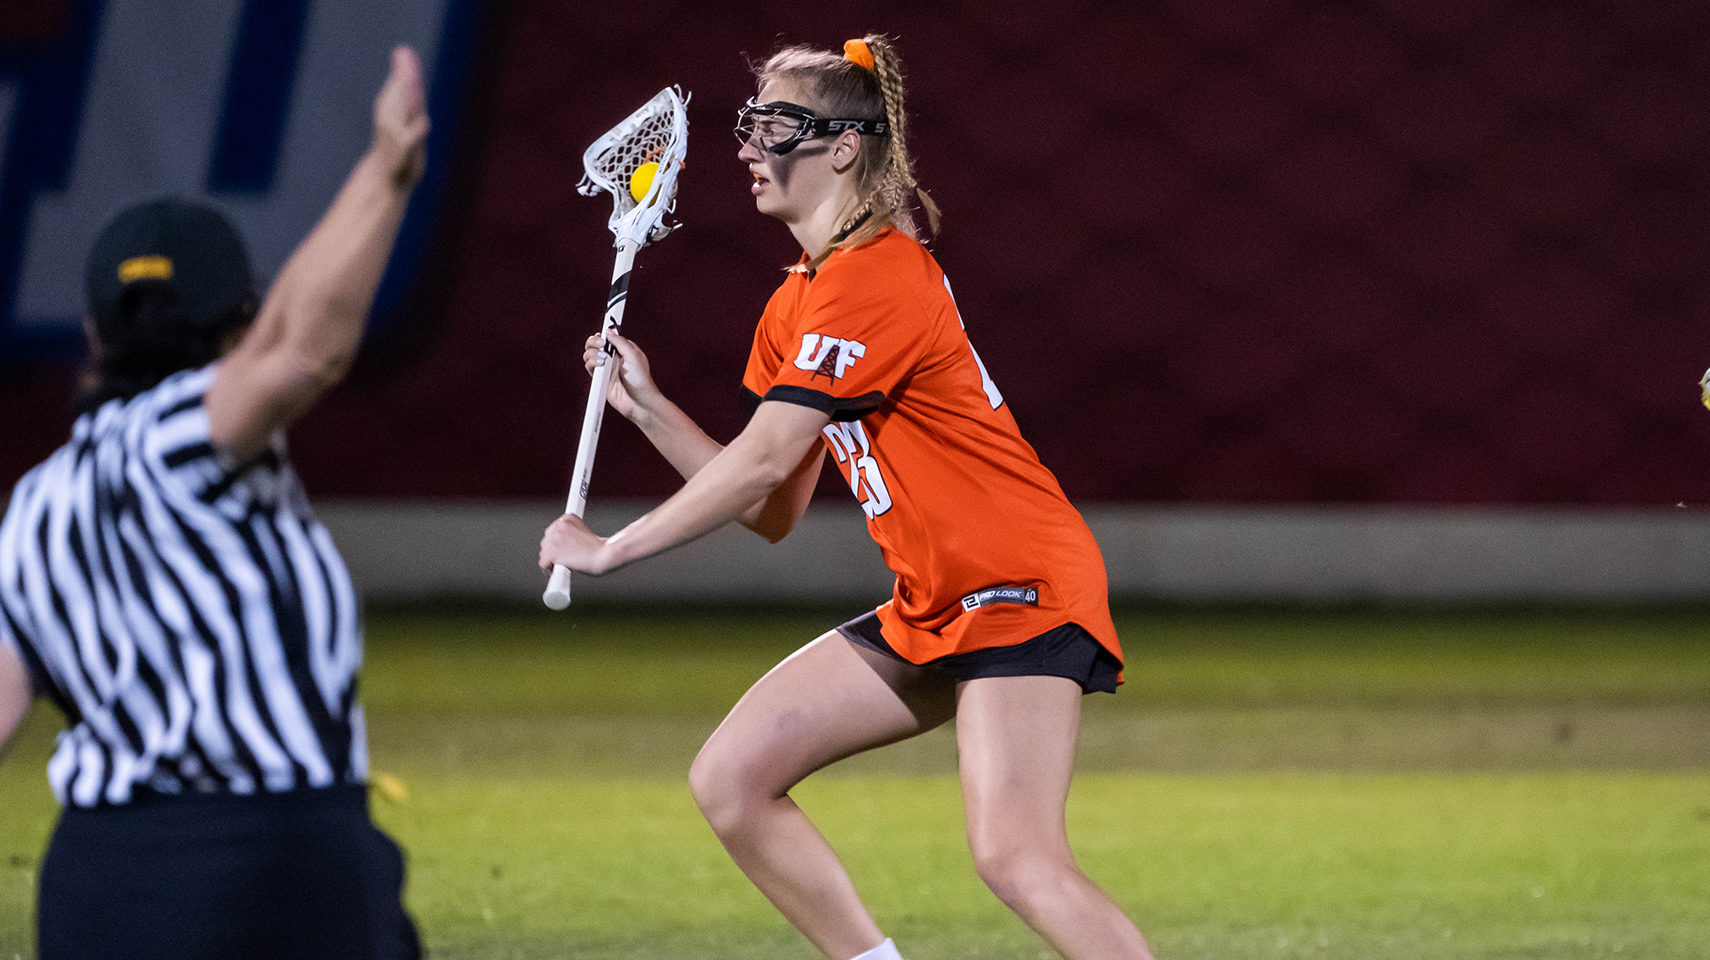 Women's lacrosse player in orange holding the ball in the middle of the field.